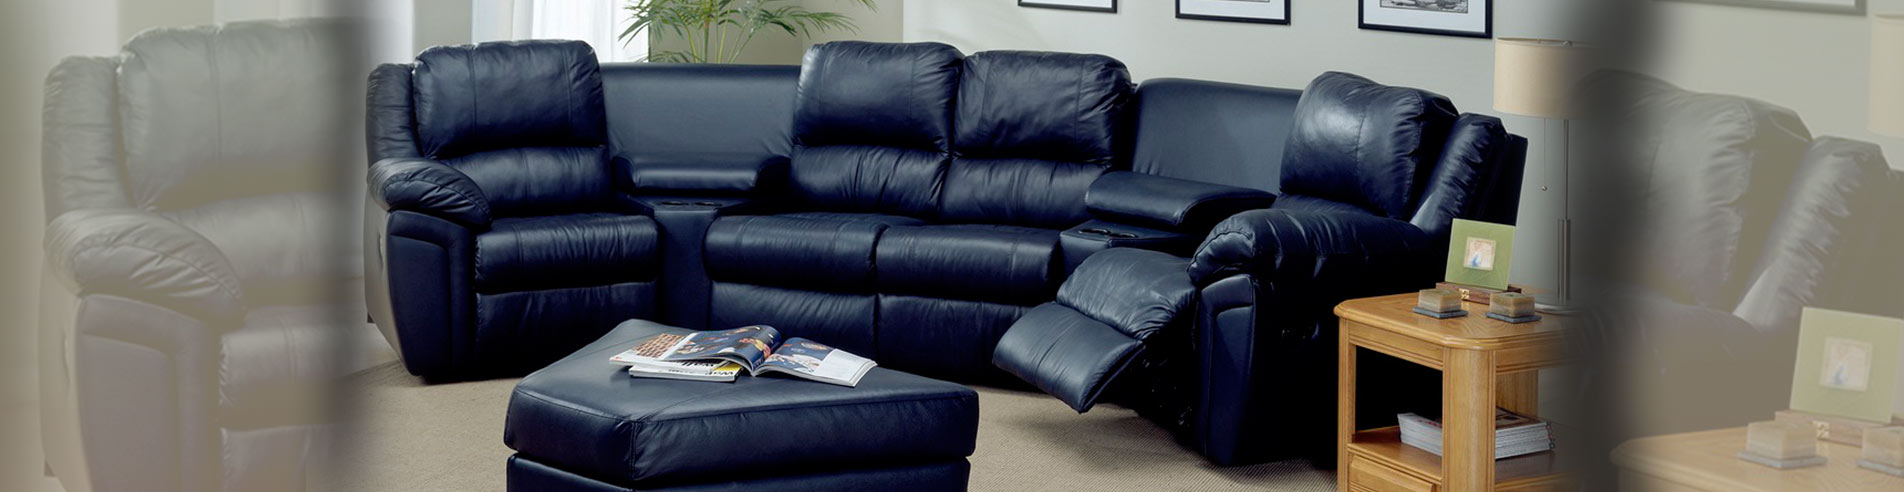 Leather Express_Daley Reclining Furniture